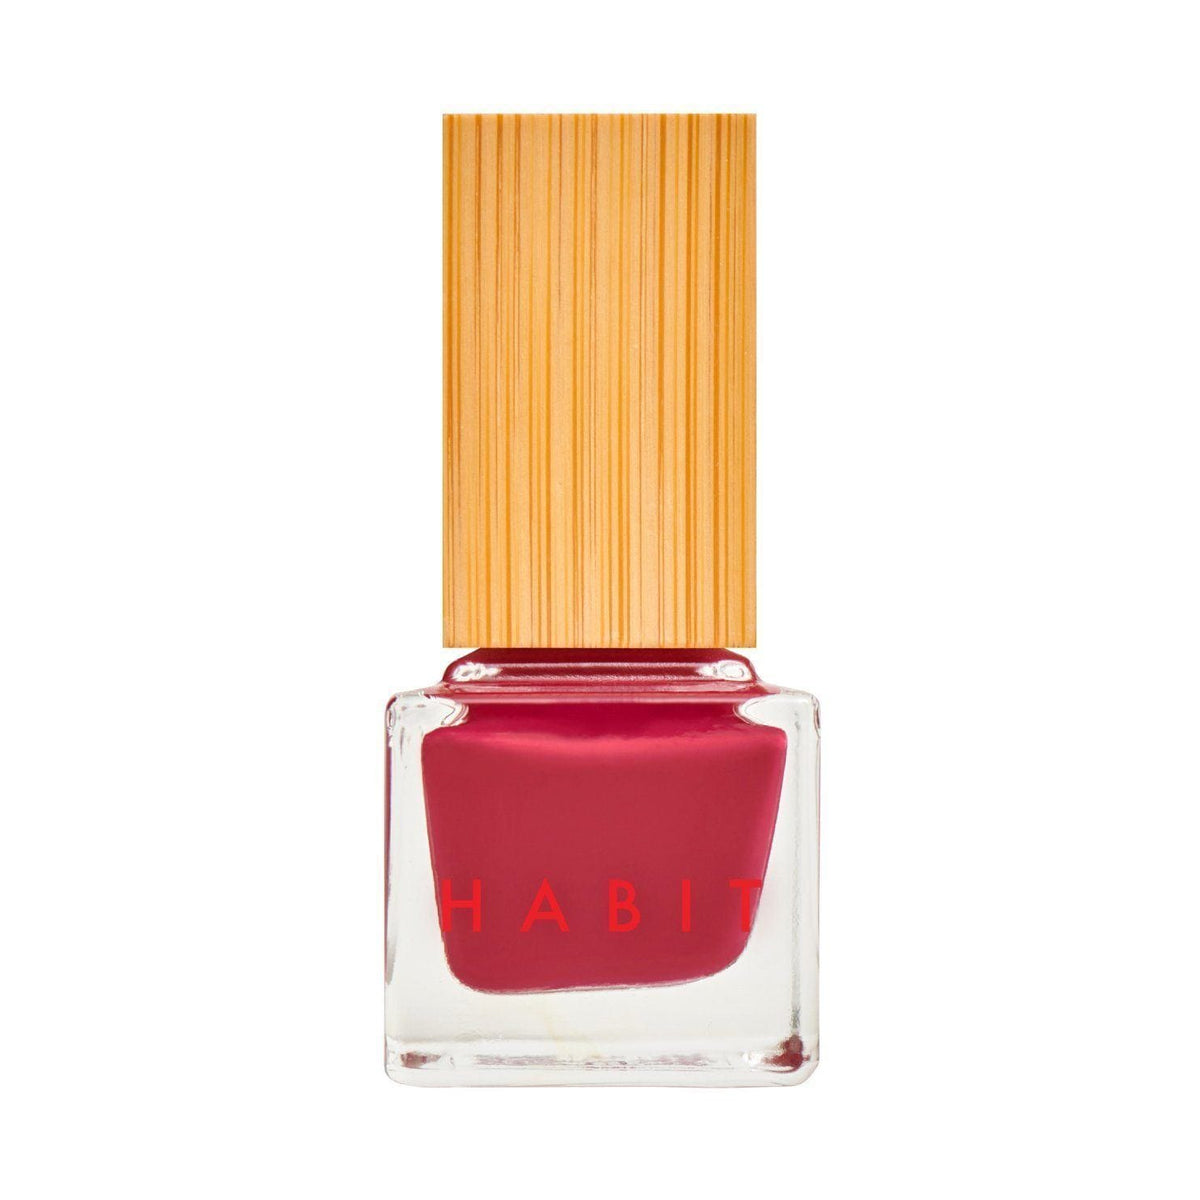 BB LOOKS BEAUTY Nail Polish Lacquer 50 NUDE - Price in India, Buy BB LOOKS  BEAUTY Nail Polish Lacquer 50 NUDE Online In India, Reviews, Ratings &  Features | Flipkart.com